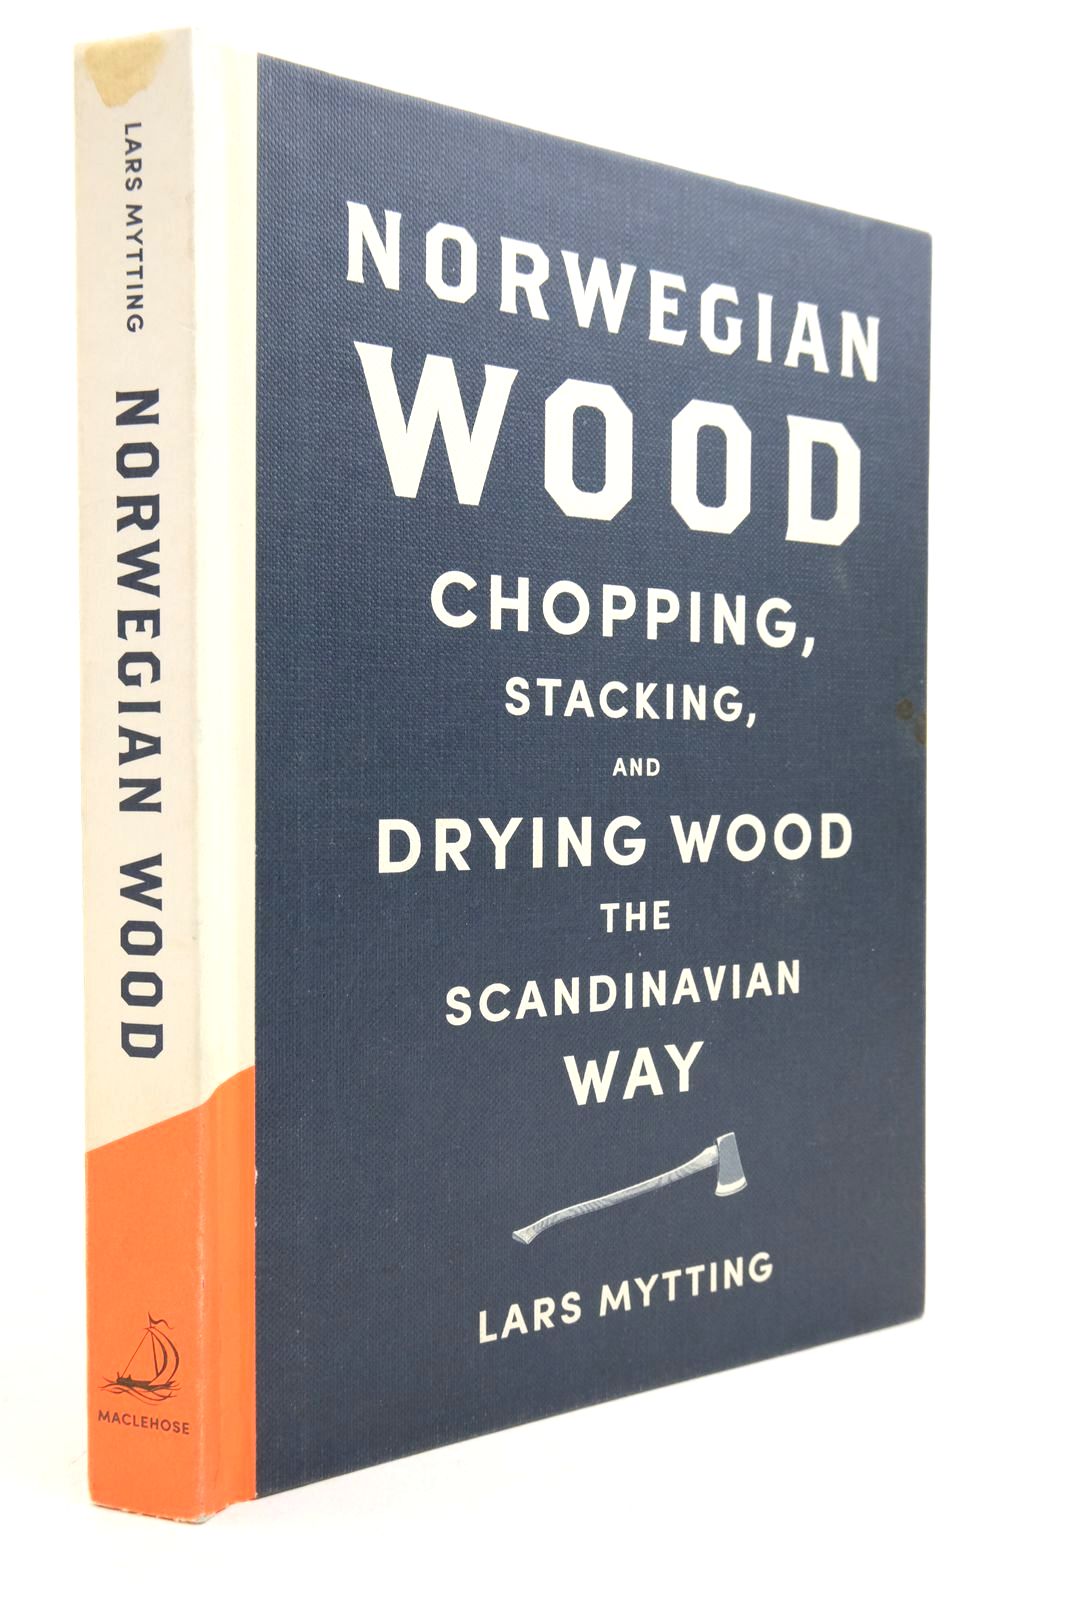 Photo of NORWEGIAN WOOD CHOPPING, STACKING, AND DRYING WOOD THE SCANDINAVIAN WAY- Stock Number: 2140723